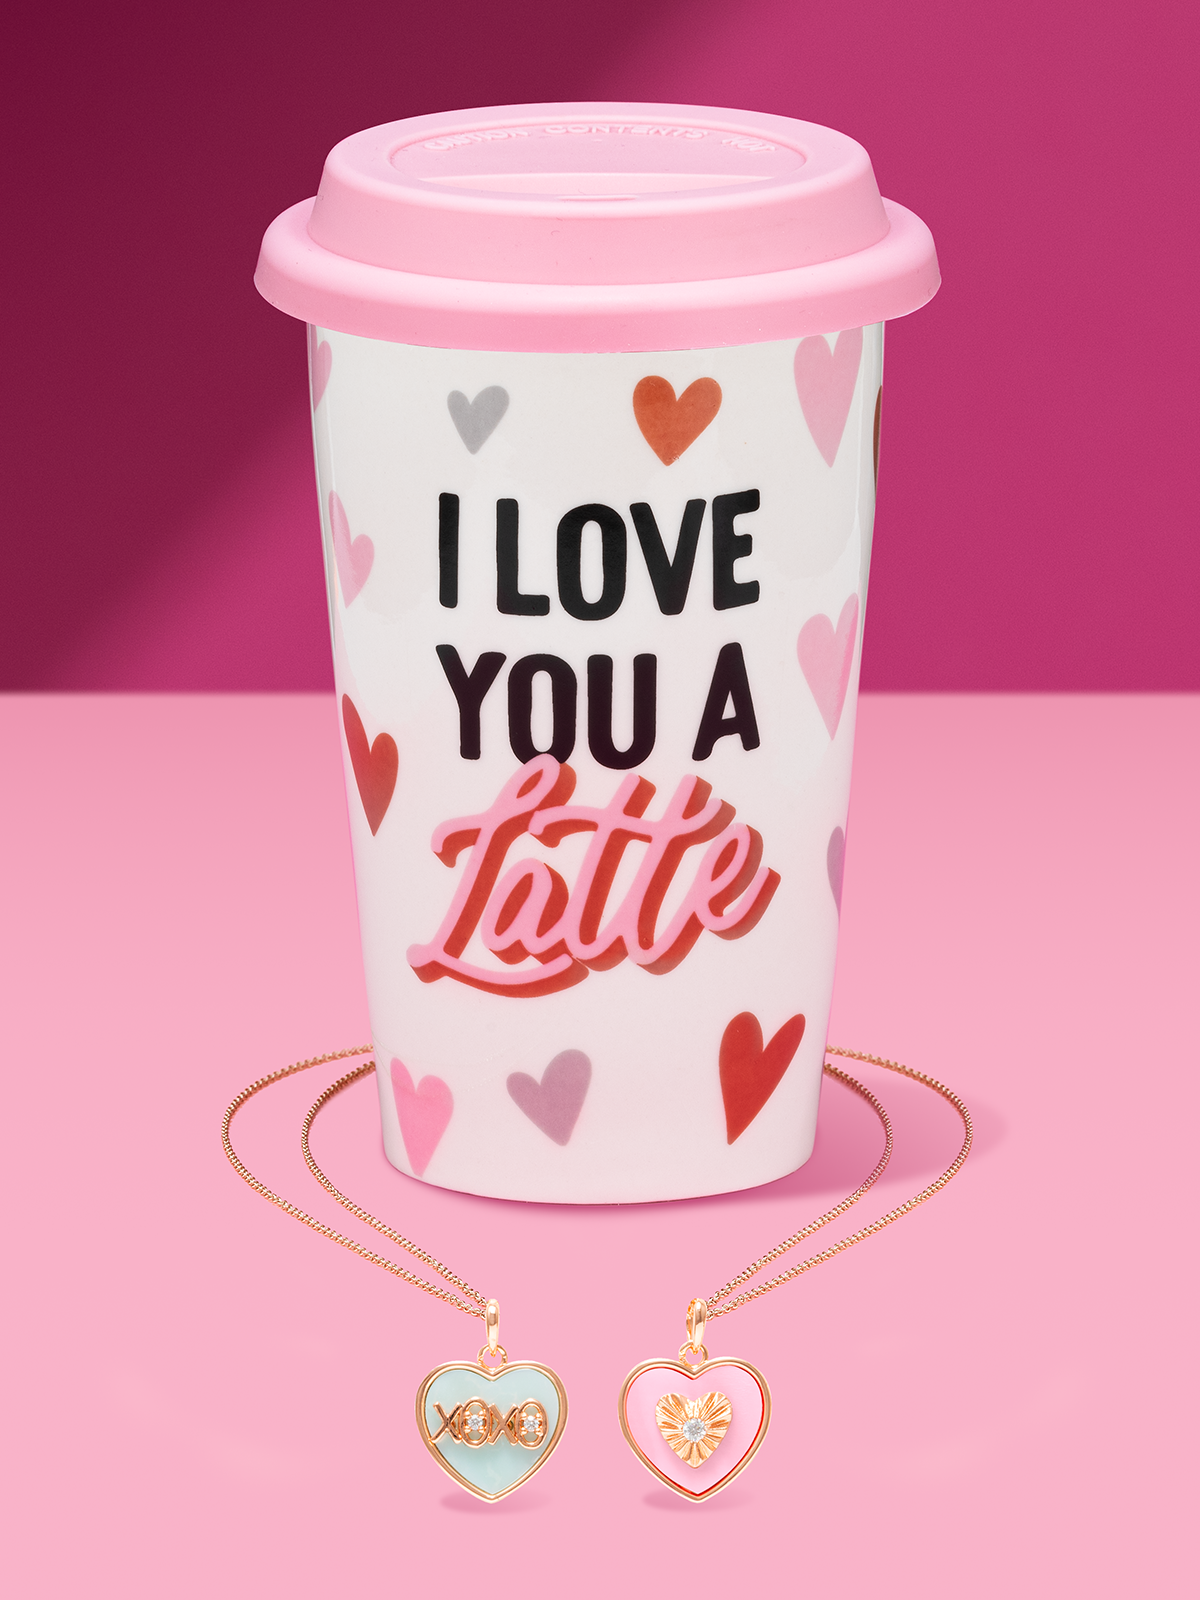 Charmed Aroma - I Love You a Latte Mug - Necklace Collection